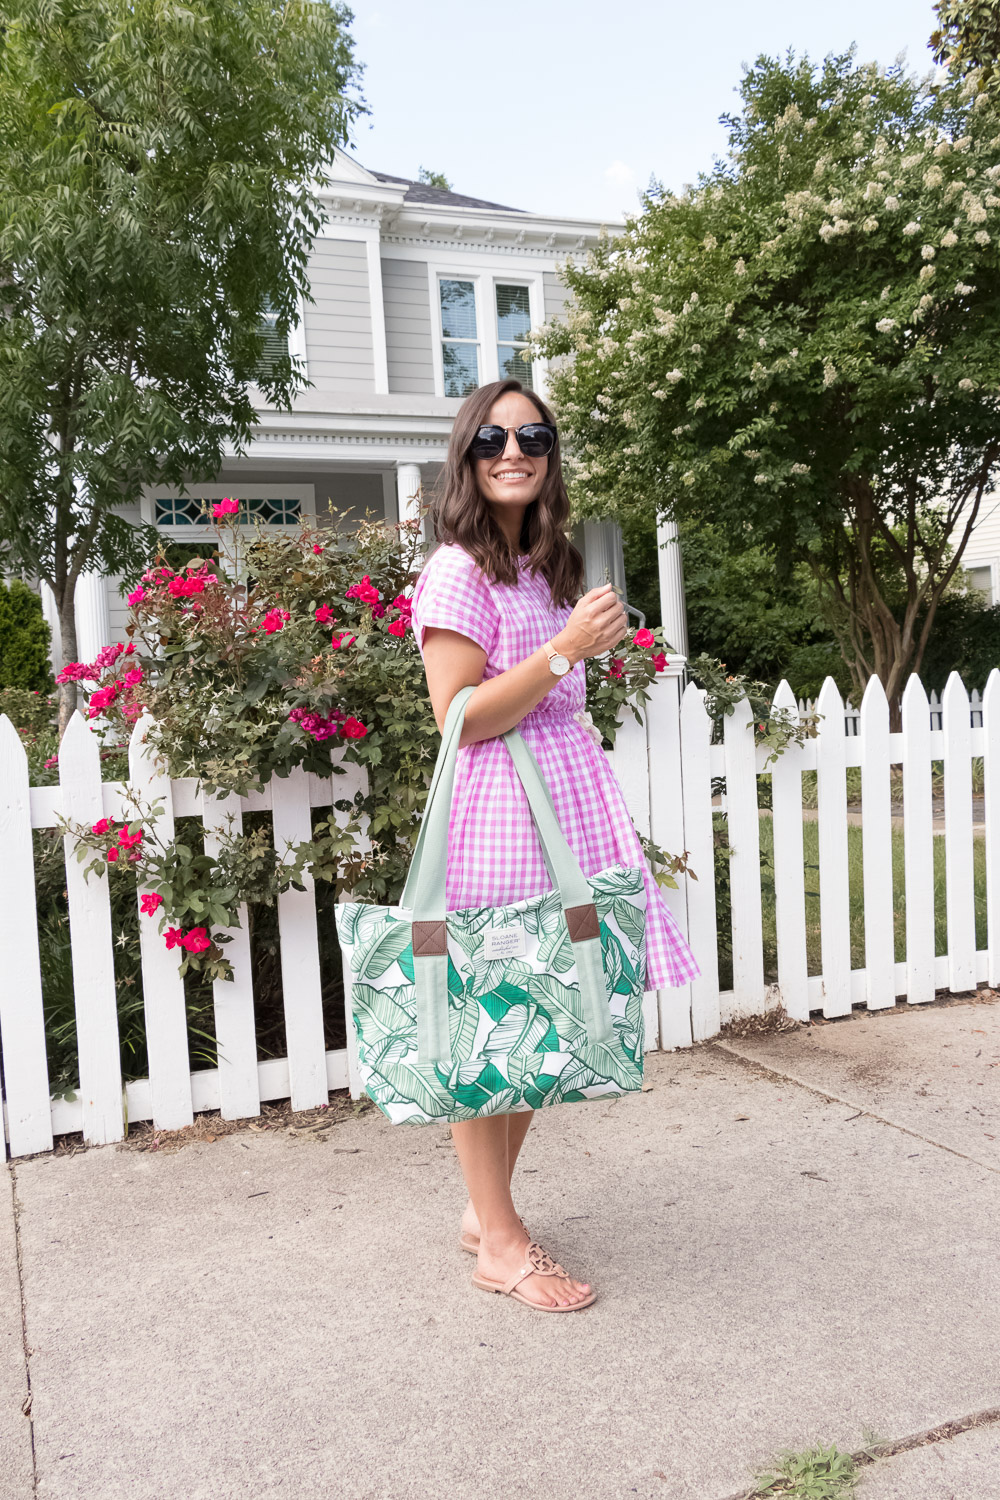 Gingham Dress from j. crew with tory burch sandals